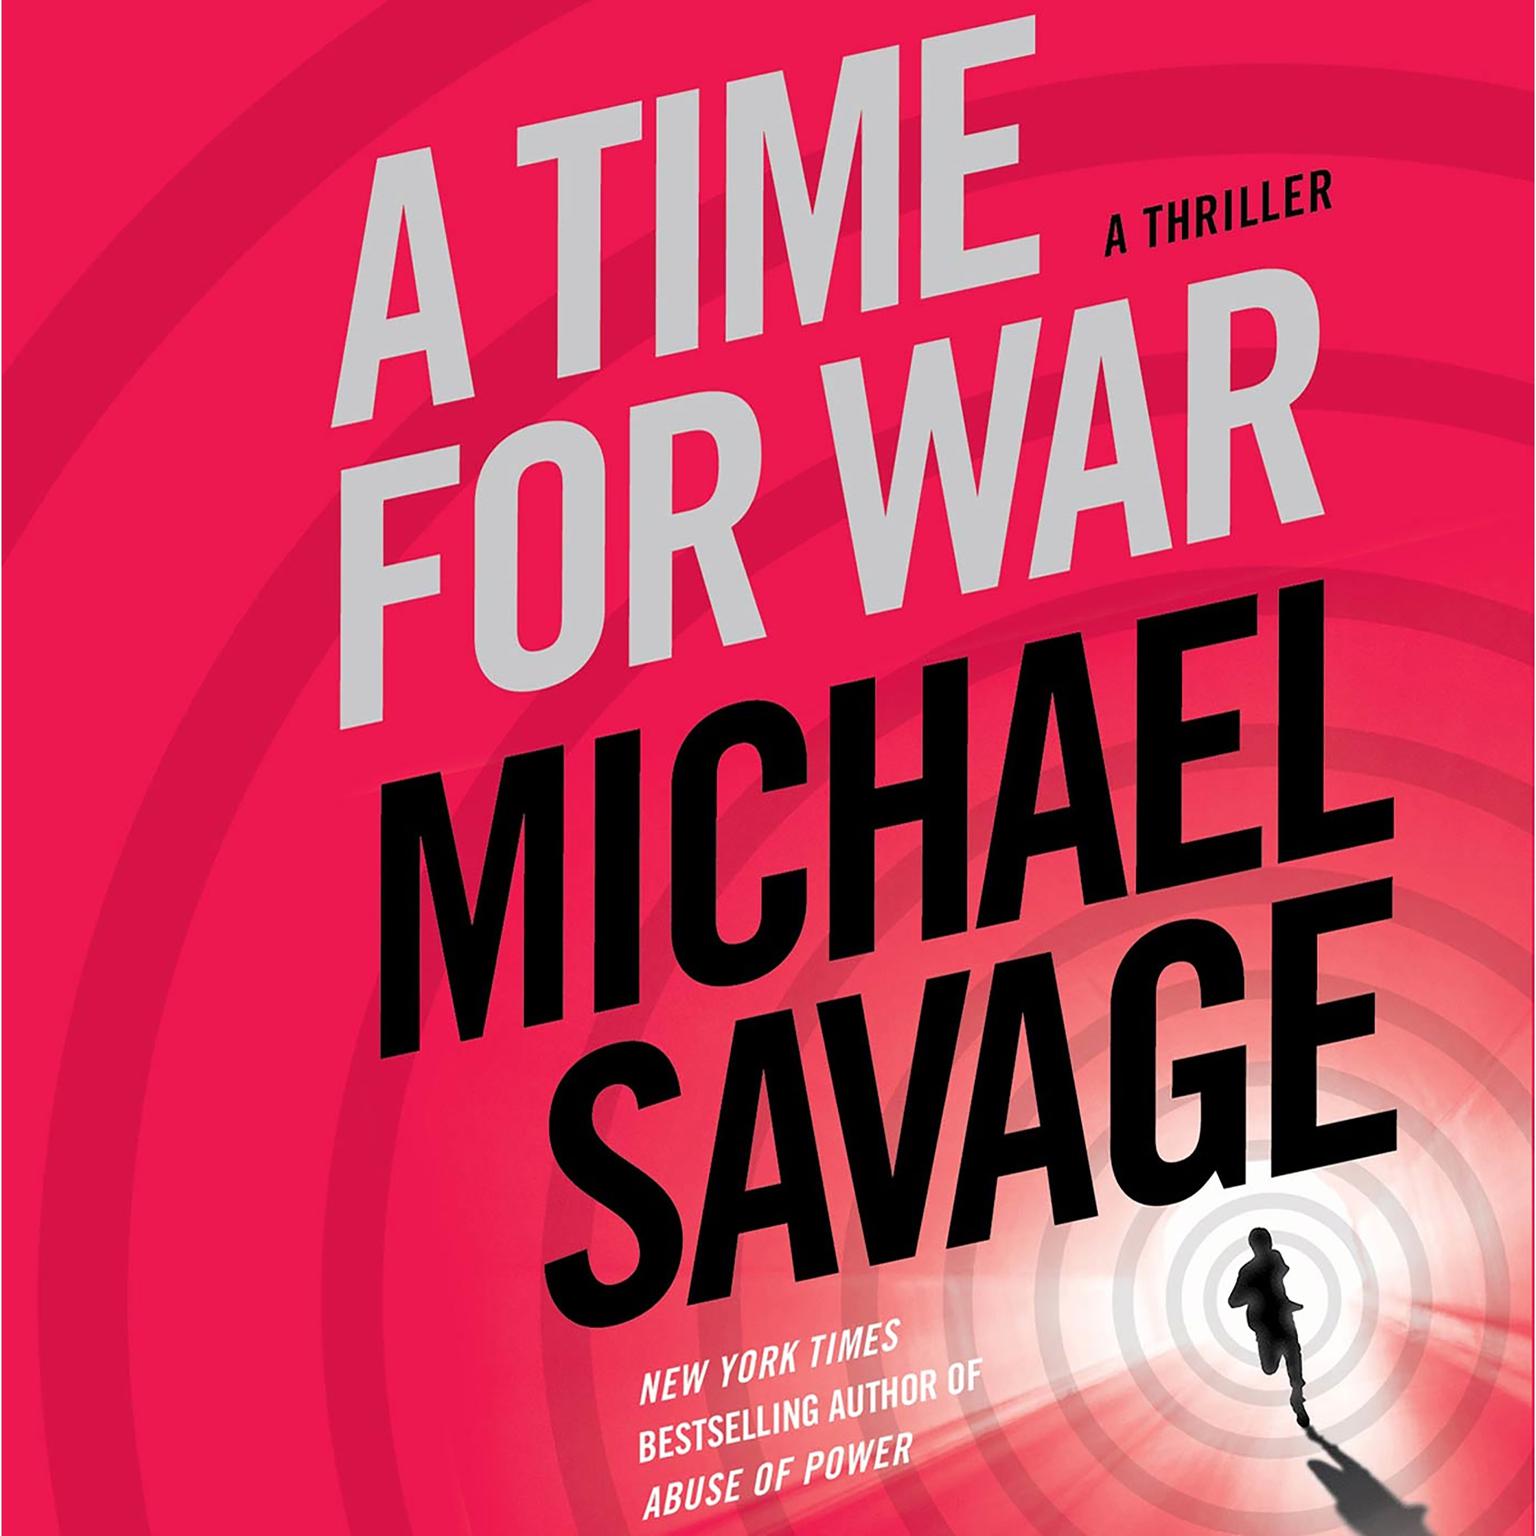 A Time for War: A Thriller Audiobook, by Michael Savage